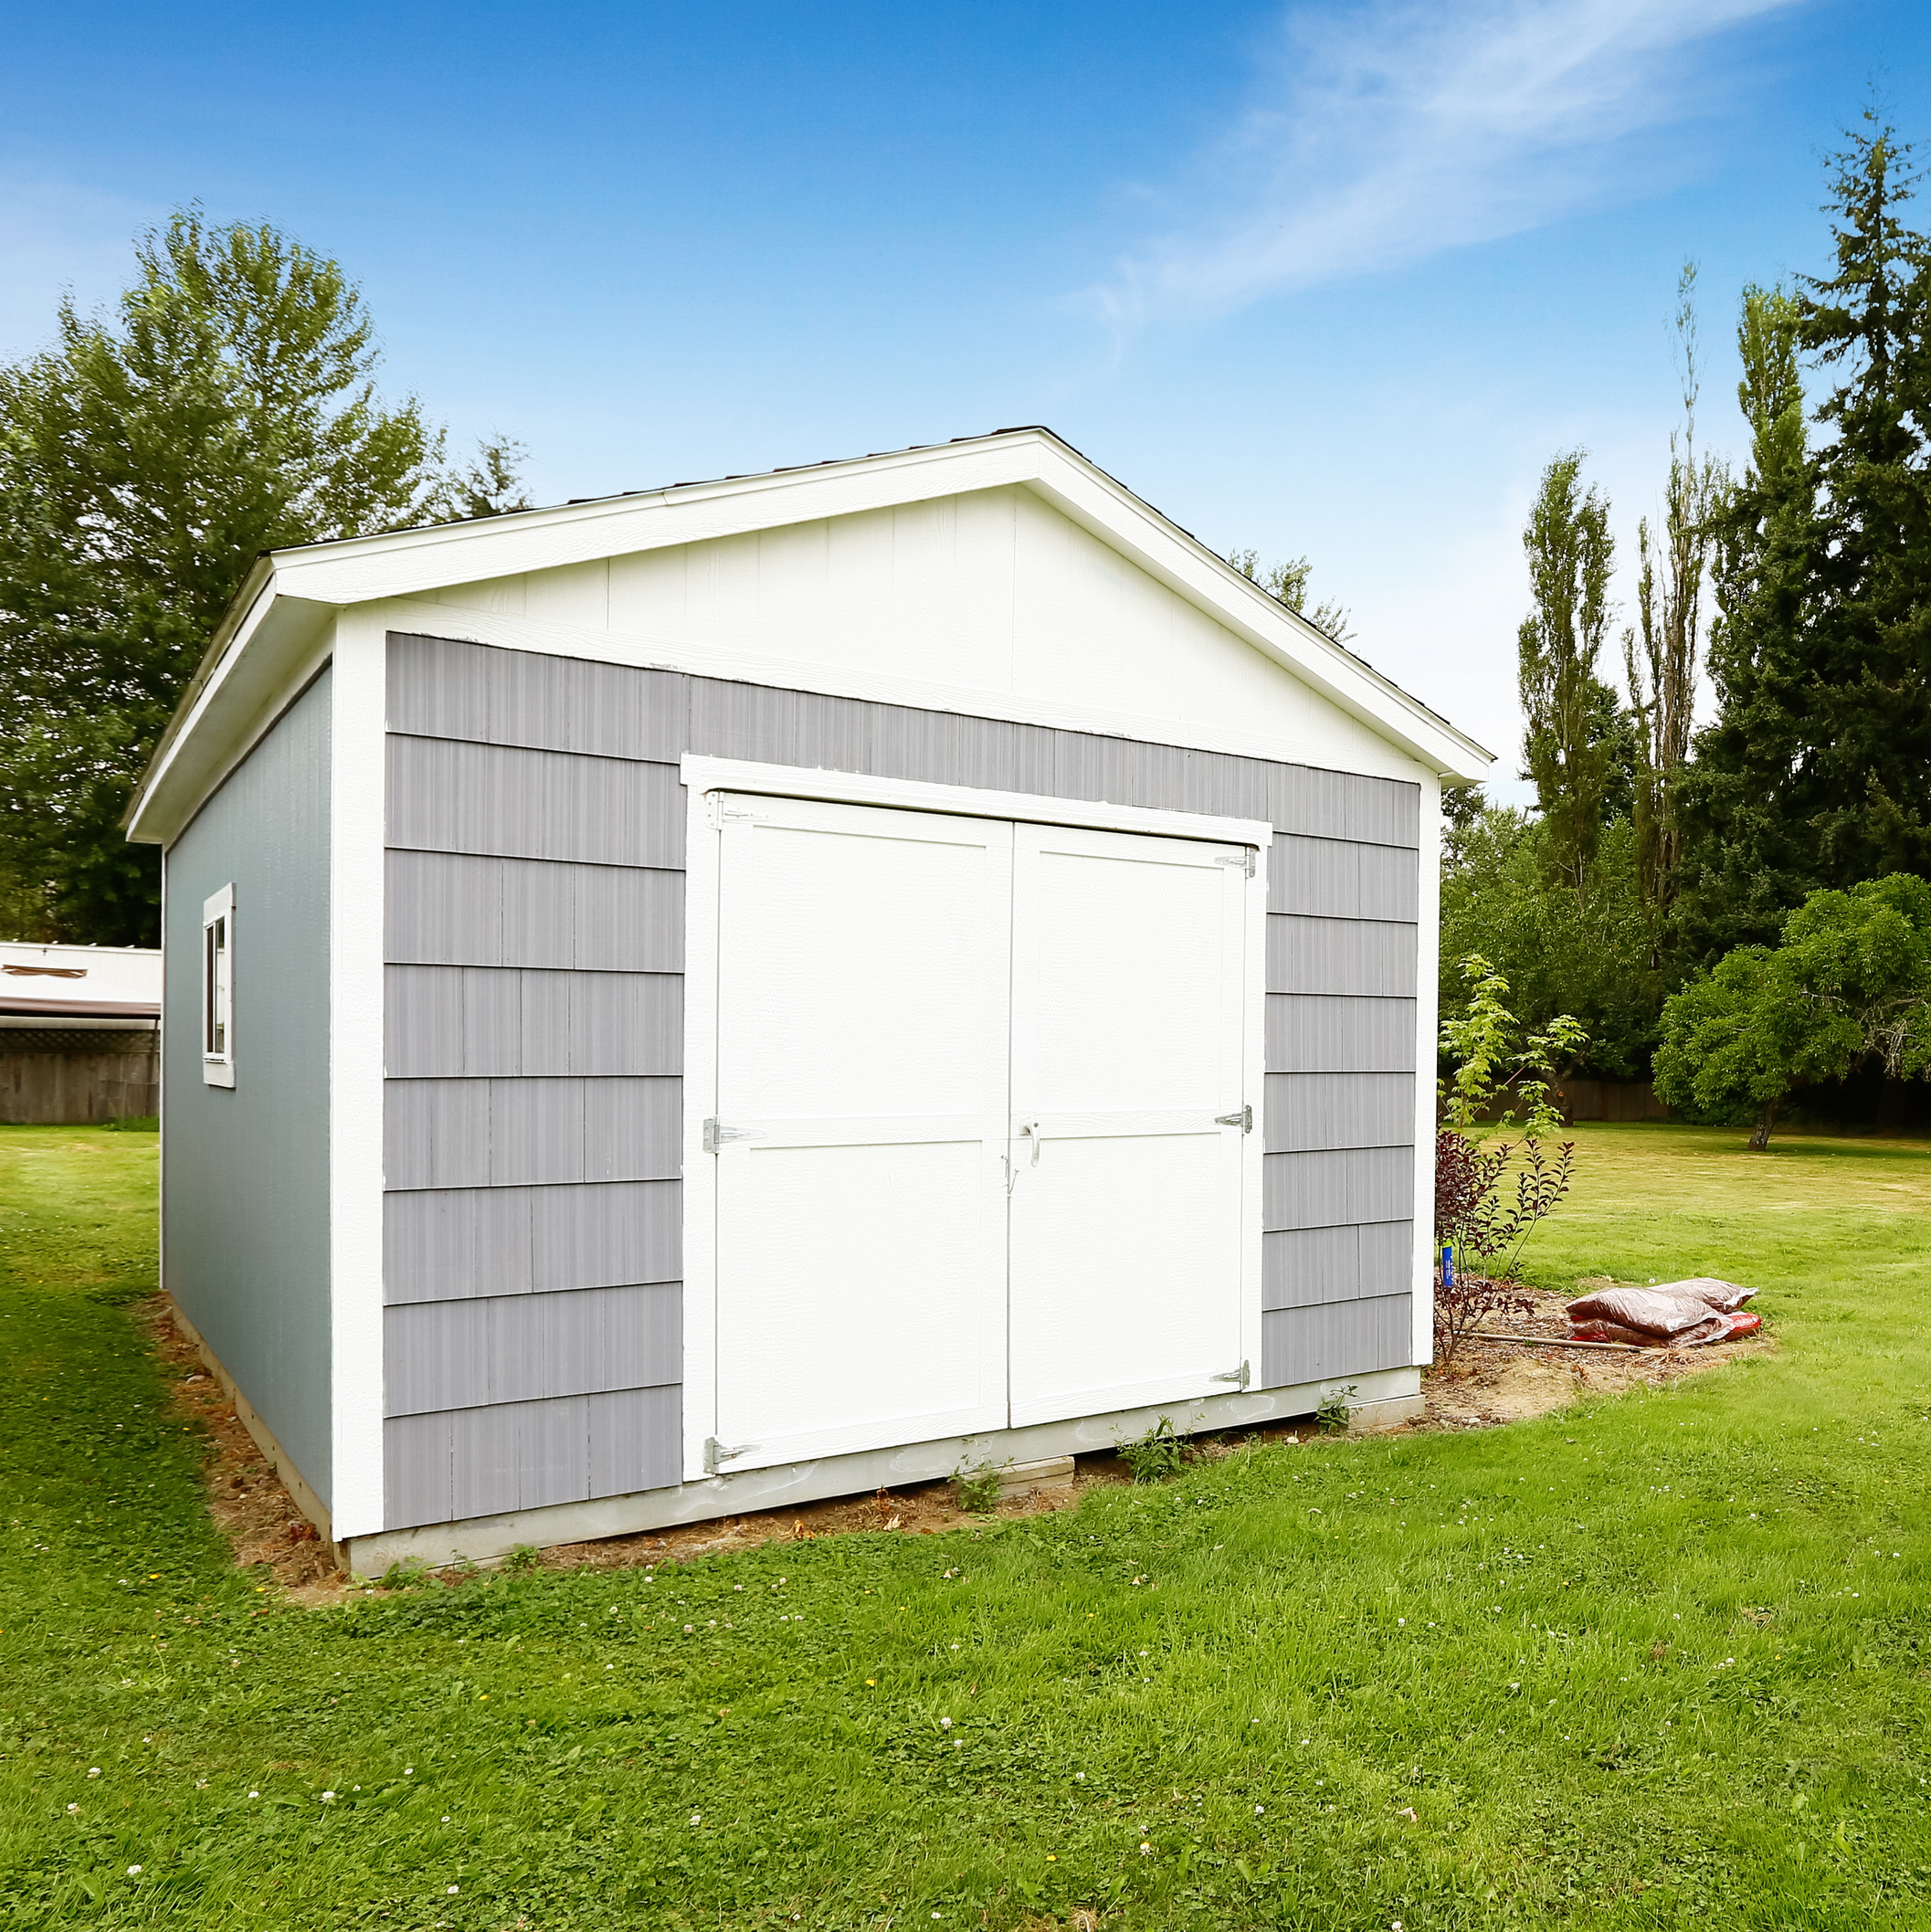 floors for garden shed ideas